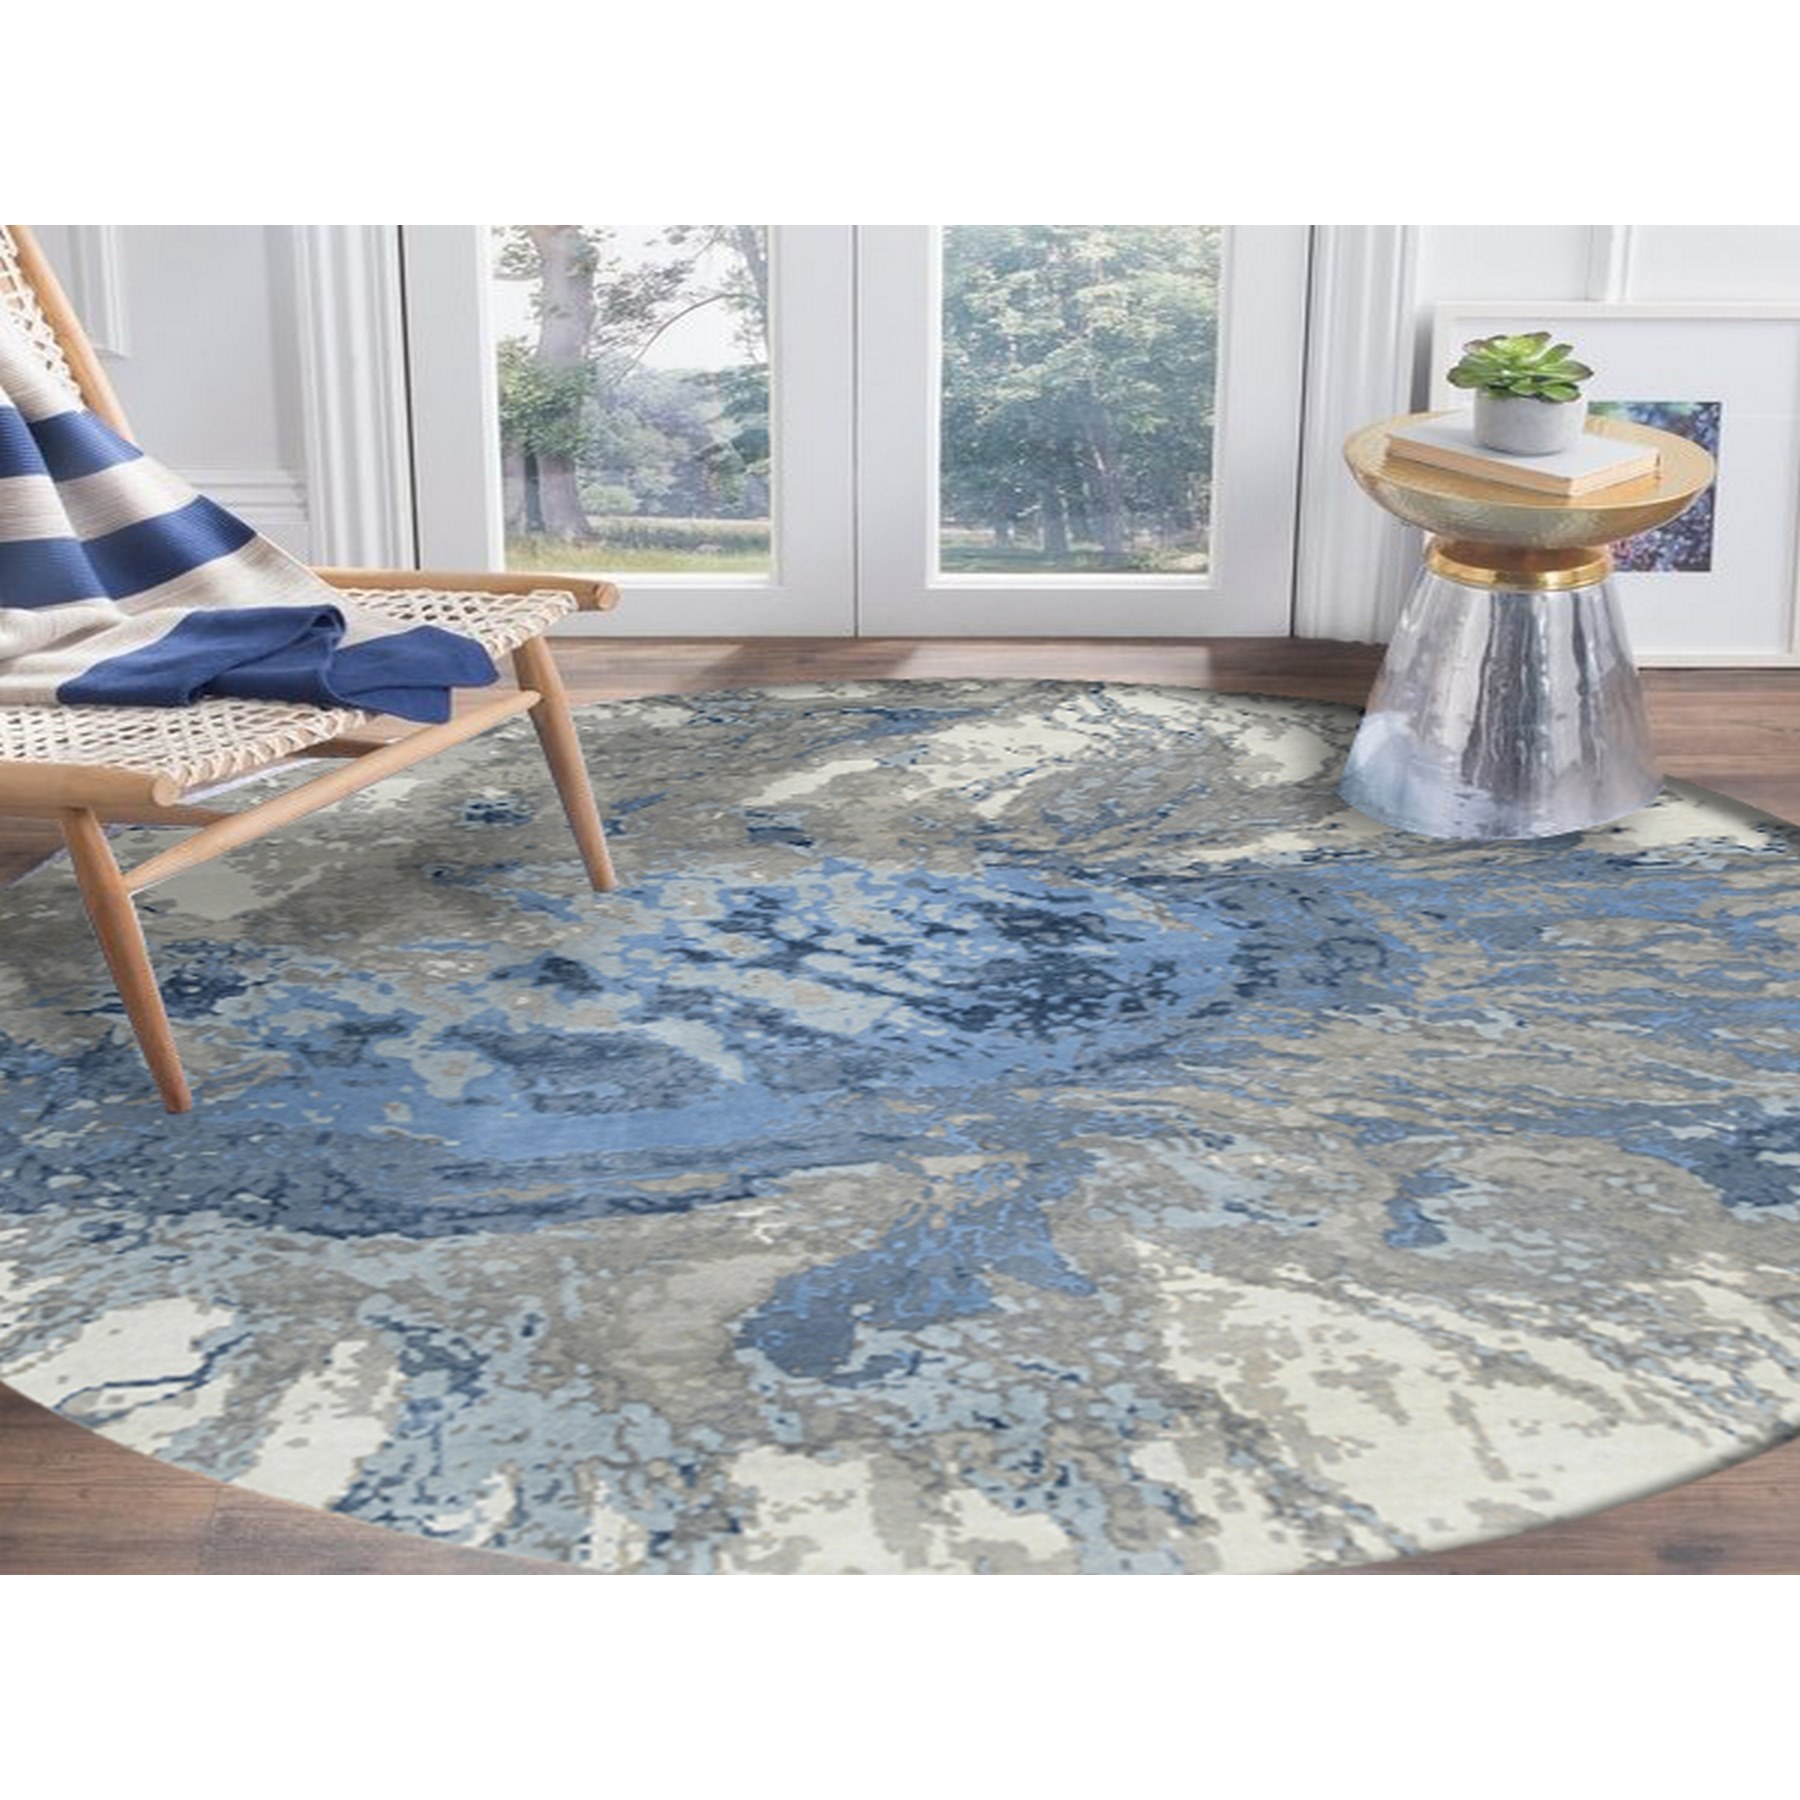 9'9"x9'9" Blue, Hand Woven Modern Abstract Design, Hi-low Pile Wool and Silk, Round Oriental Rug 